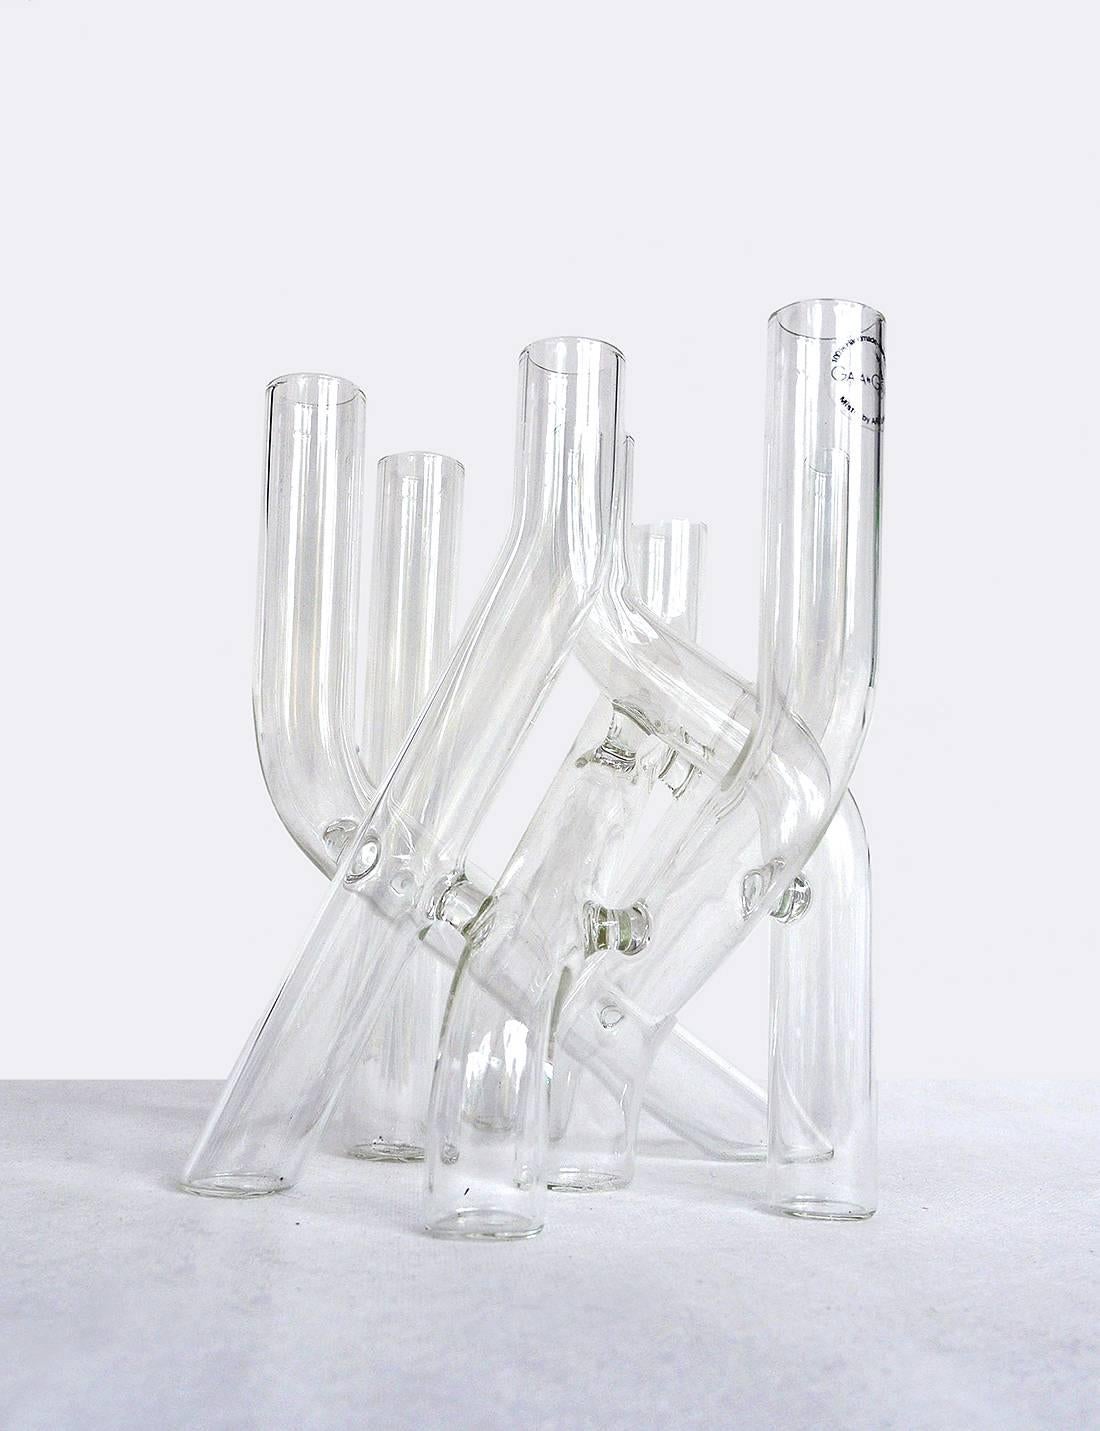 The Mistic candle holder can be used with seven standard candles or flowers or as decorative art object.